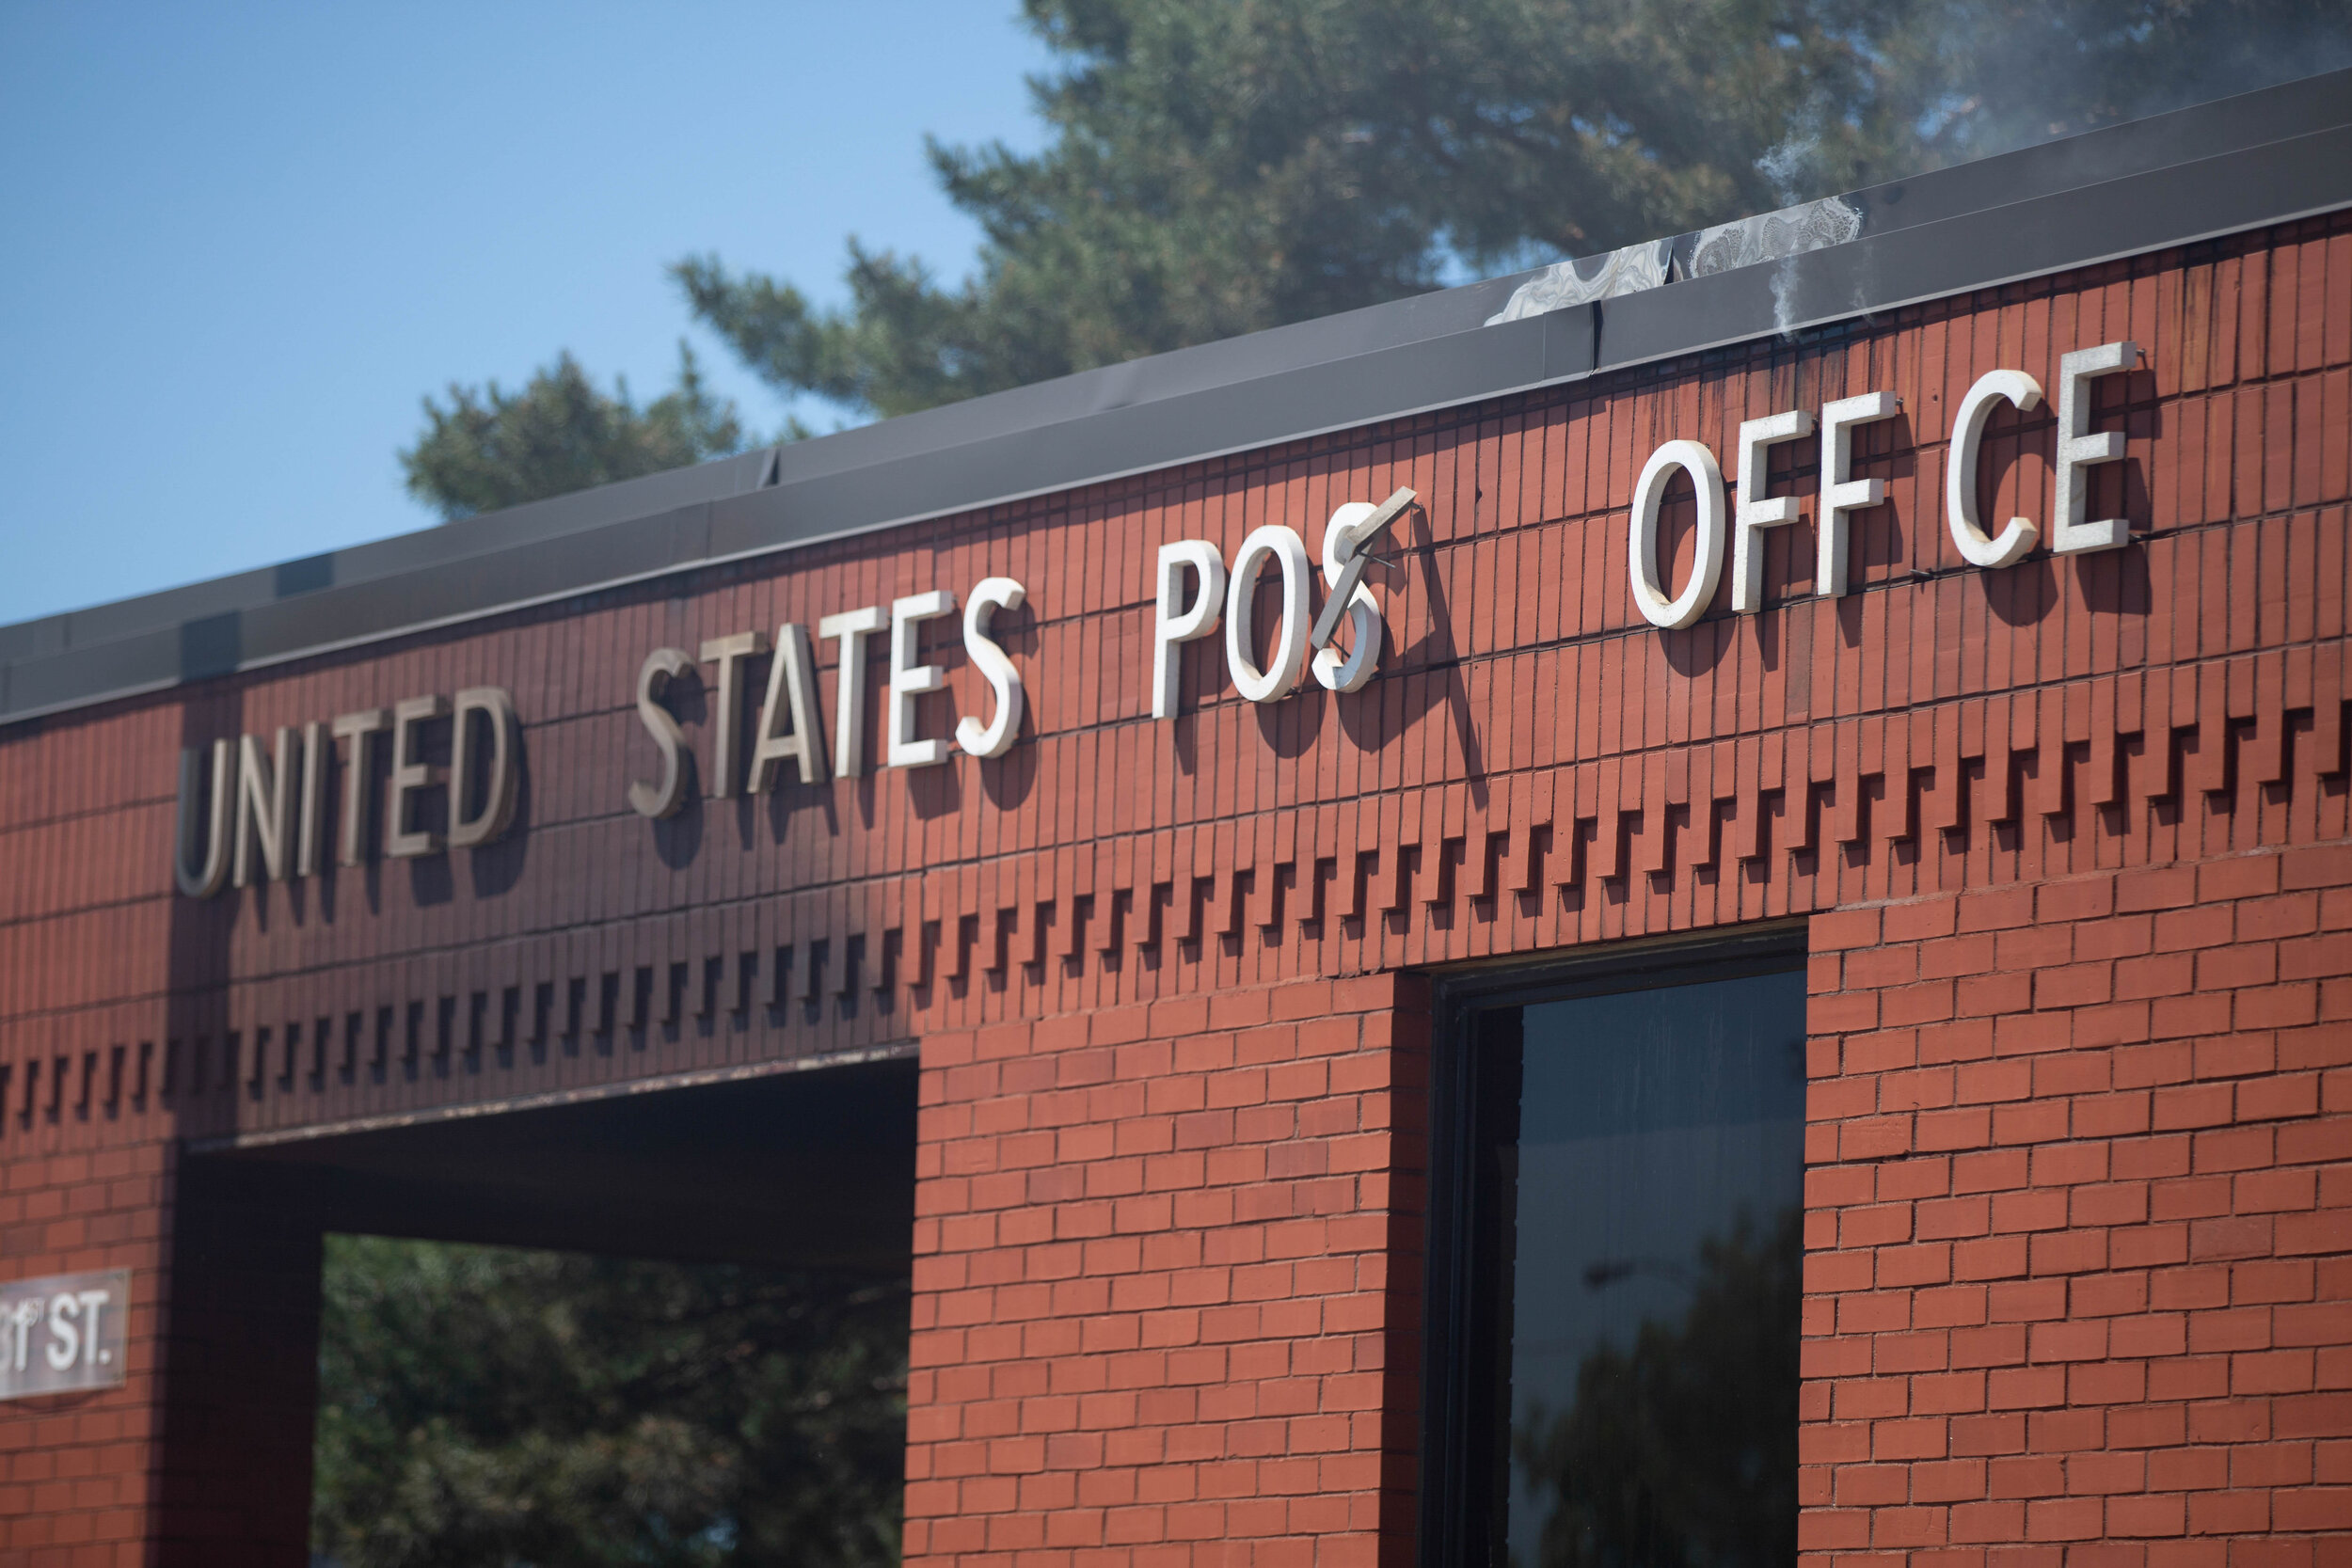  Nearly falling off the building, the t in "post office" nearly fell off during a fire started by a riot in Minneapolis, Minnesota over the police killing of George Floyd on May 30, 2020. Chris Juhn/Zuma. 